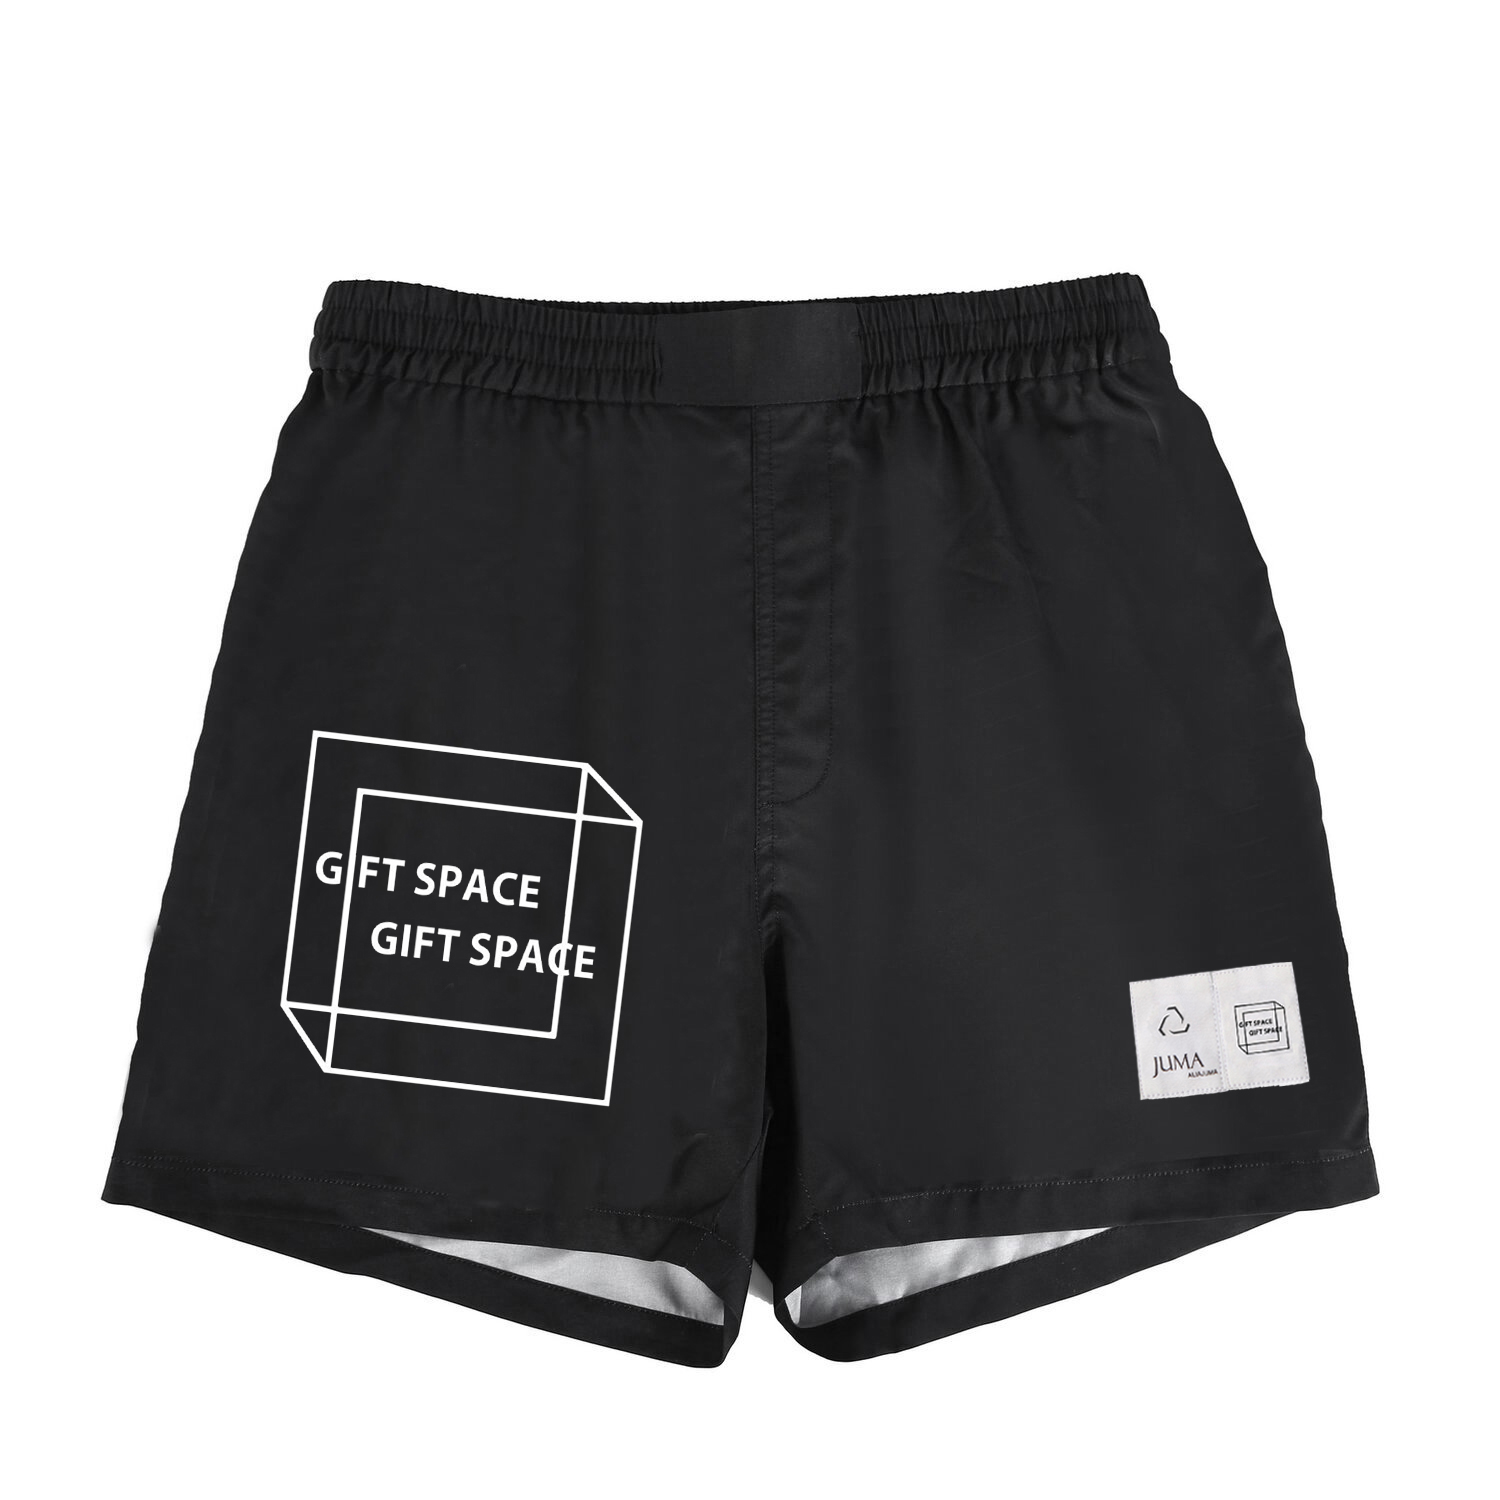 Gift Space 拳击短裤 - 4 个回收水瓶 - 黑色｜Gift Space Printed Boxer Shorts - 4 Recycled Water Bottles - Black